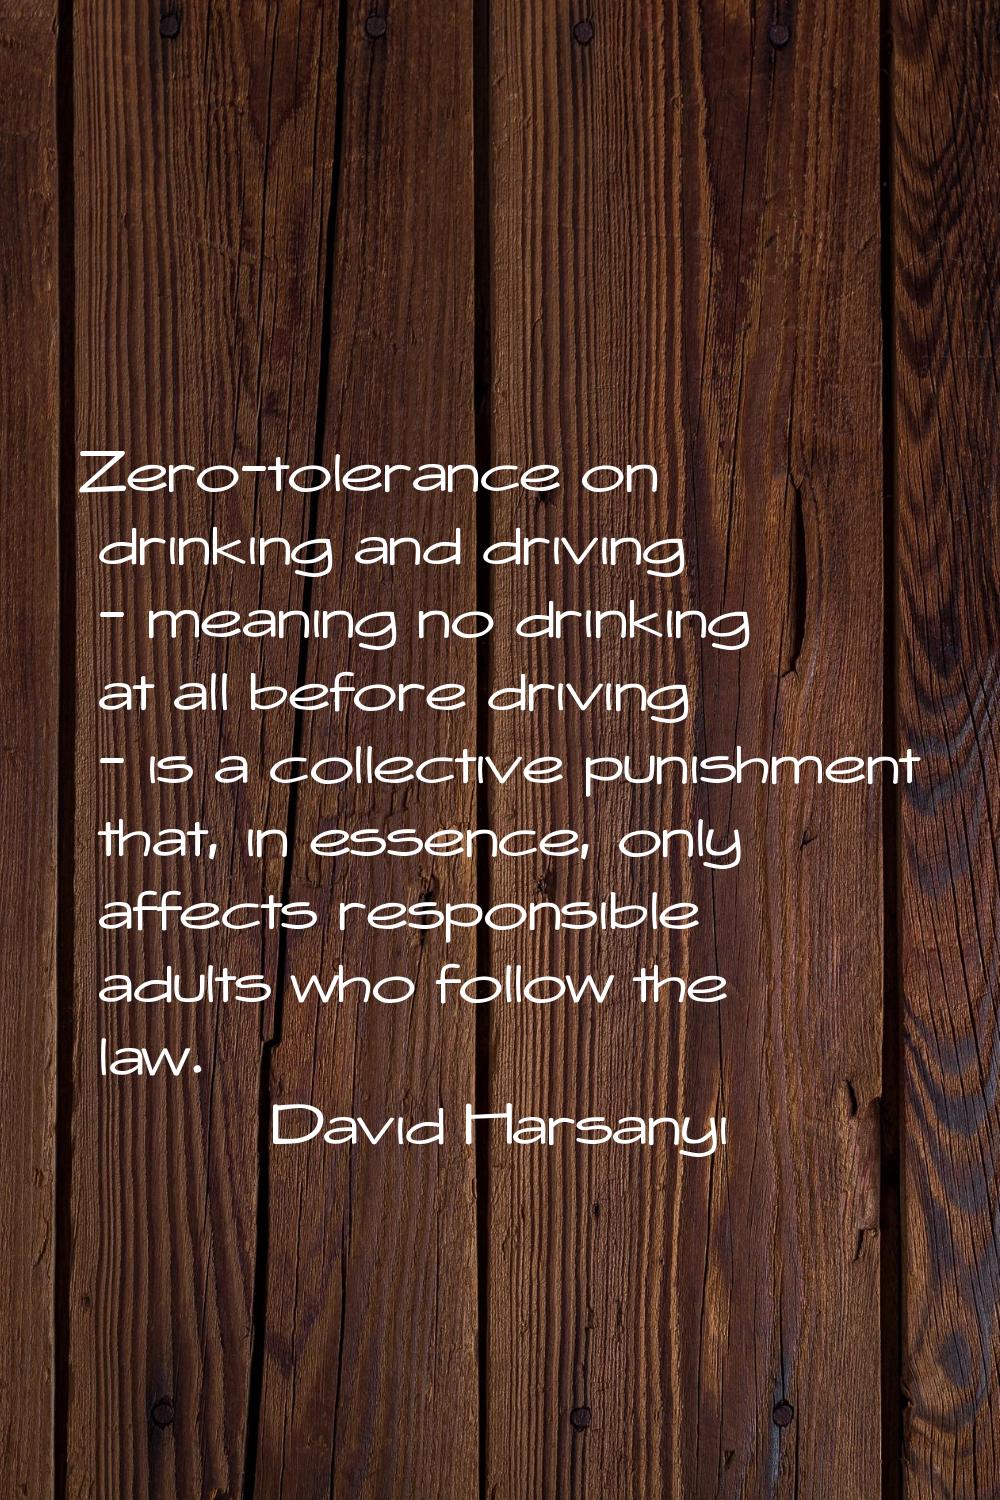 Zero-tolerance on drinking and driving - meaning no drinking at all before driving - is a collectiv